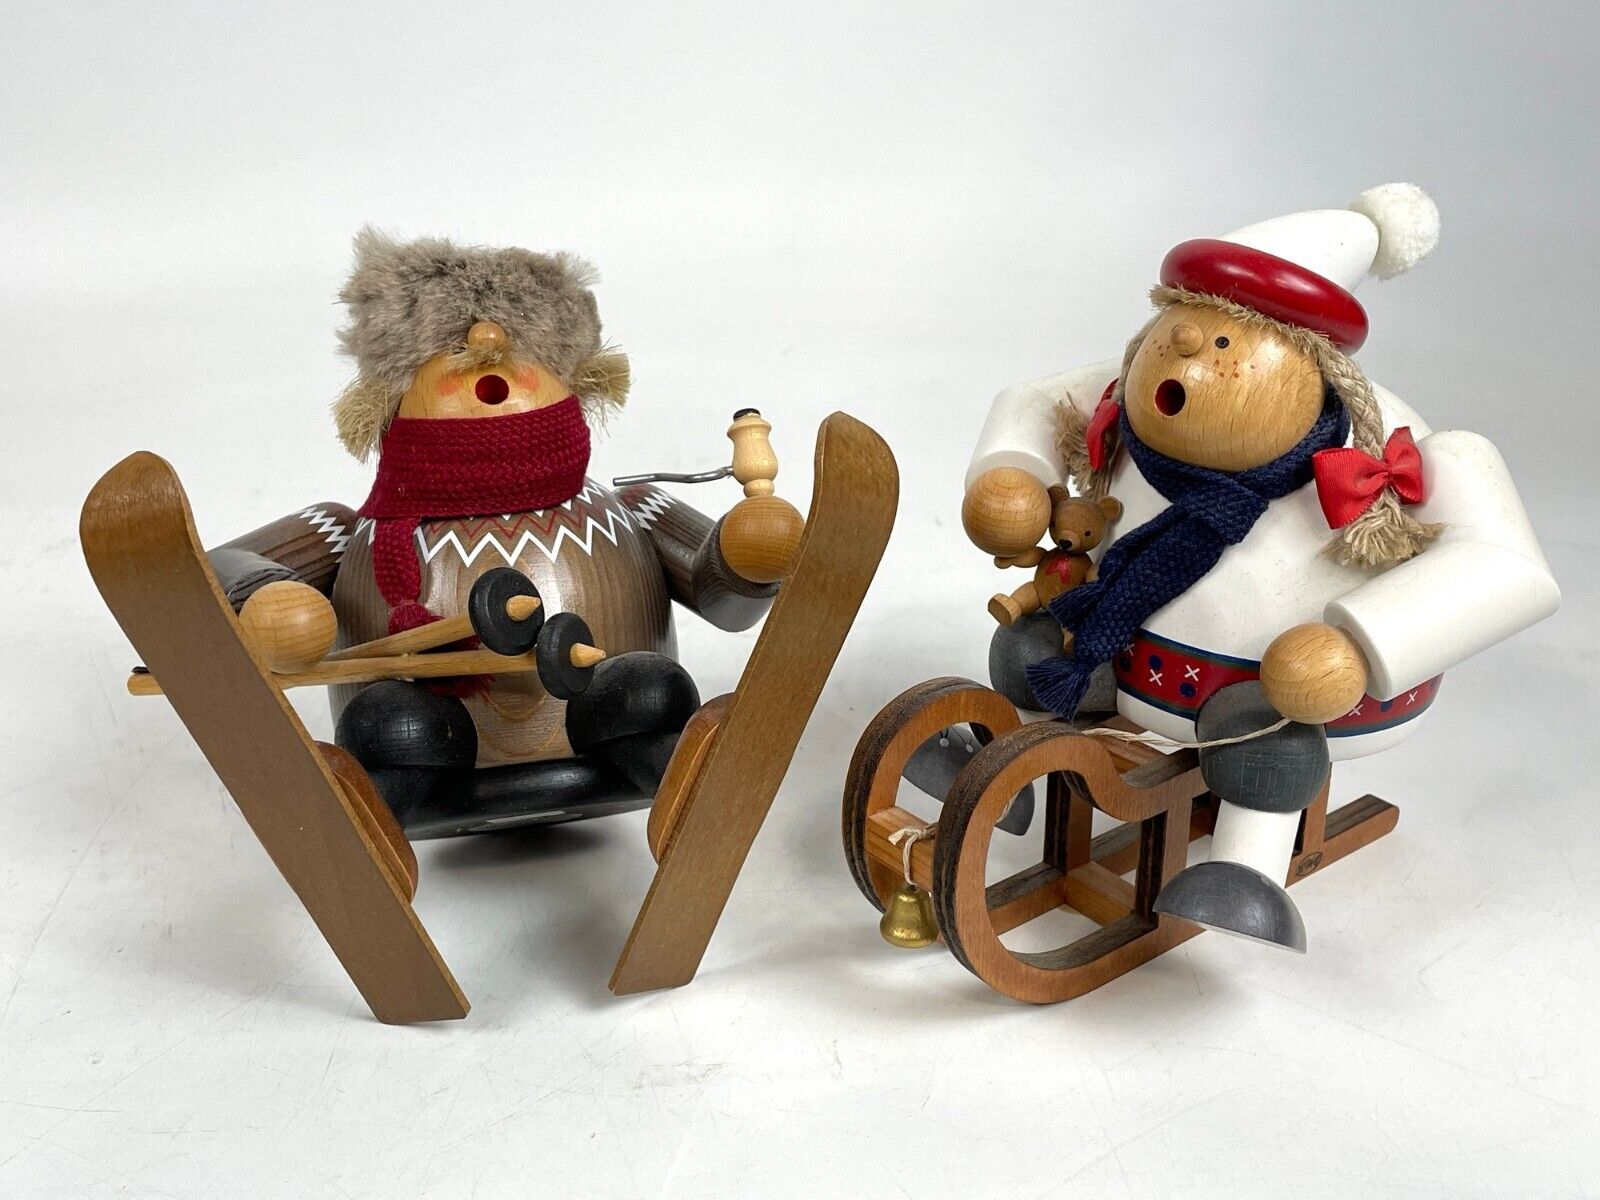 Set of 2 KWO German Incense Smokers Skier Sitting and Girl on Sled w/ Teddy Bear